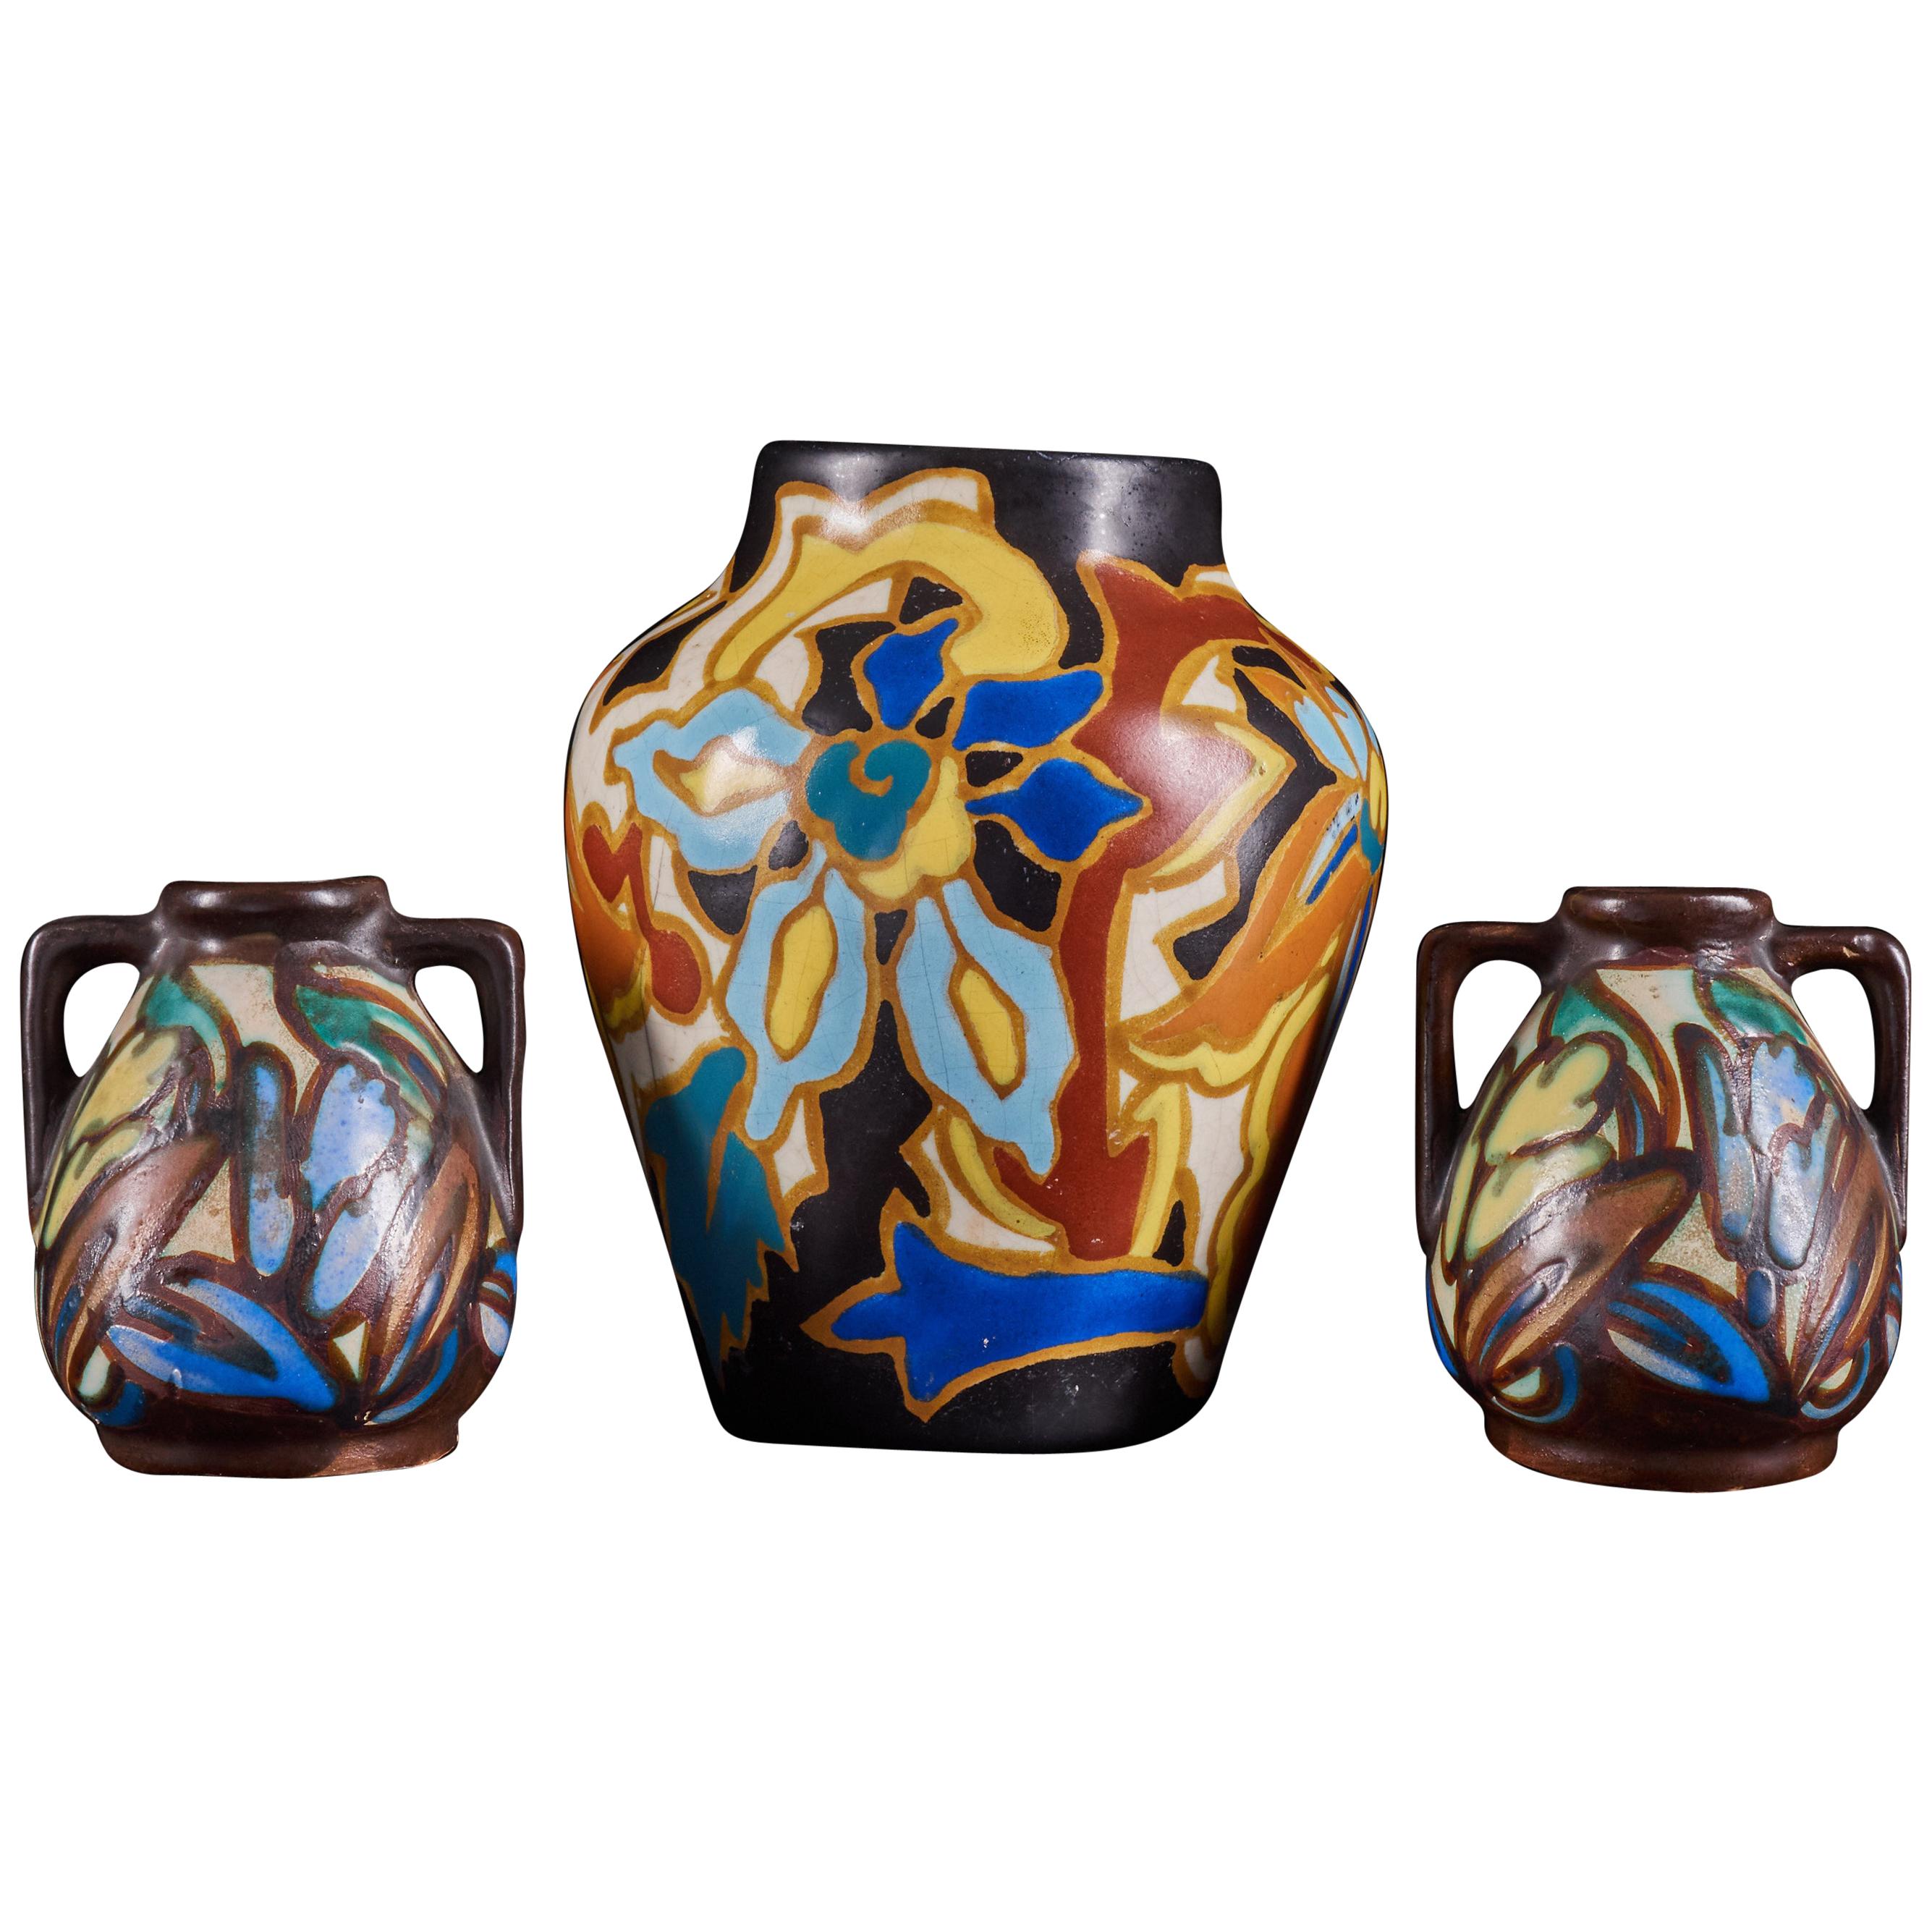 Unique Set of 3 Very Colorful Hand Painted Ceramic Vases with Floral Design